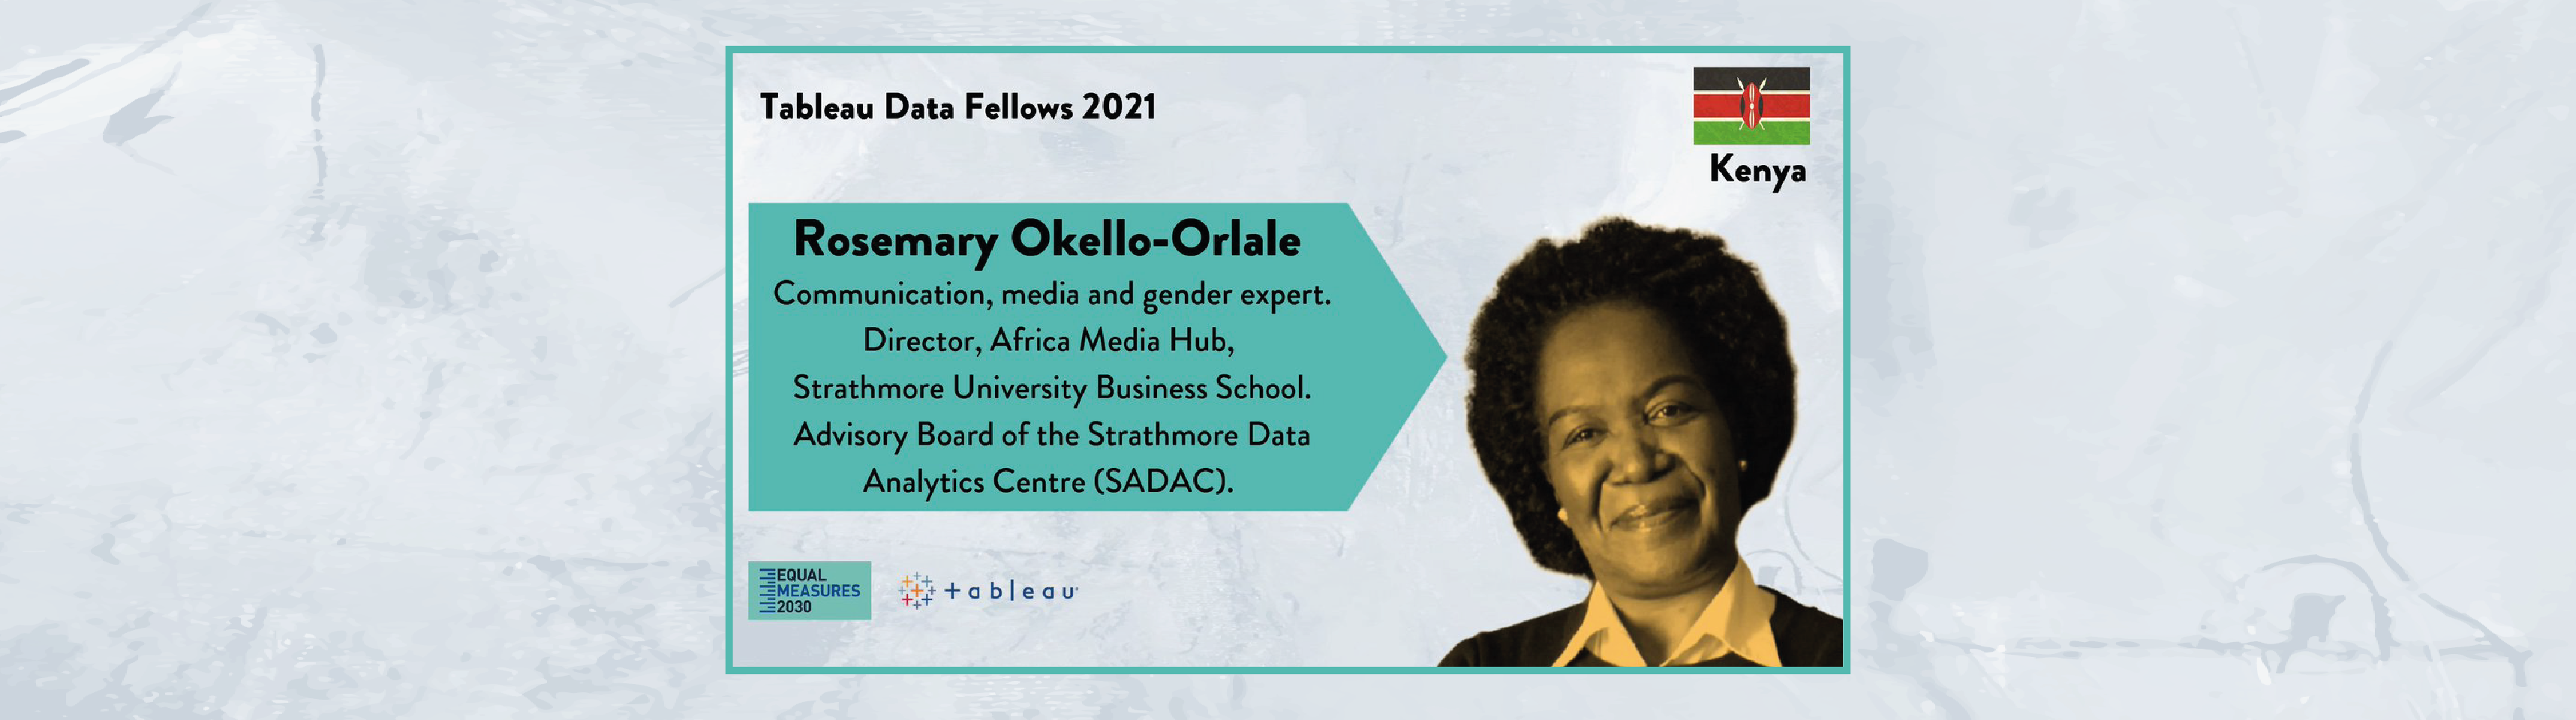 Using data journalism to advance gender equality: A conversation with Rosemary Okello-Orlale  